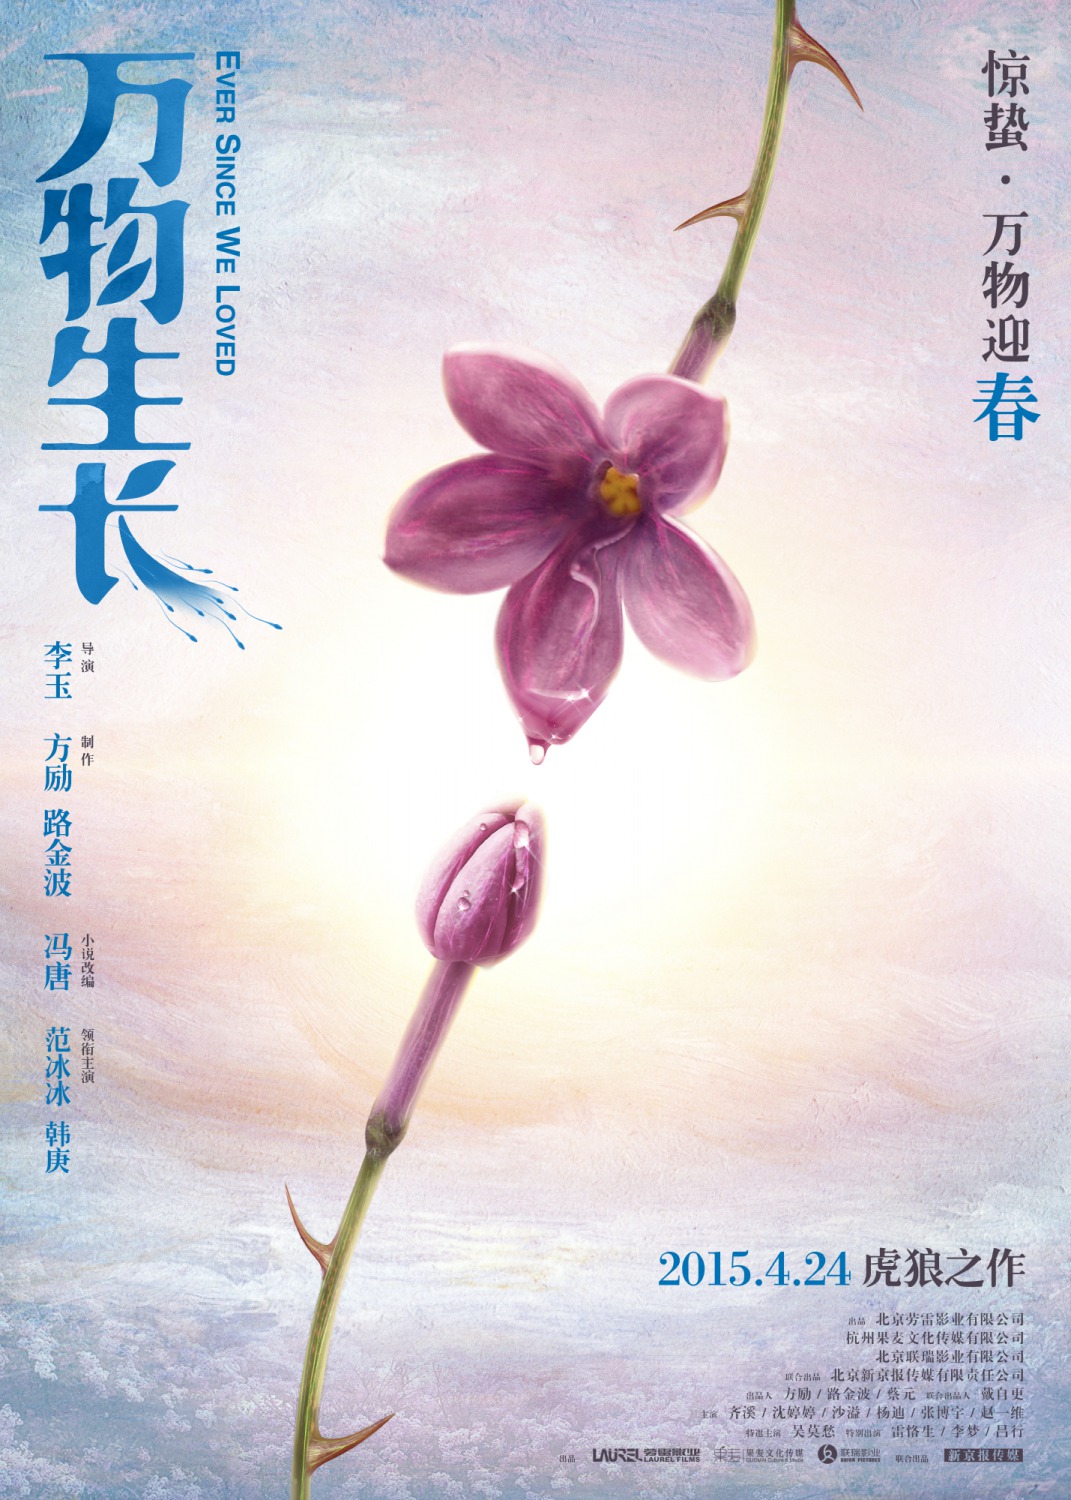 Extra Large Movie Poster Image for Wan Wu Sheng Zhang (#4 of 4)